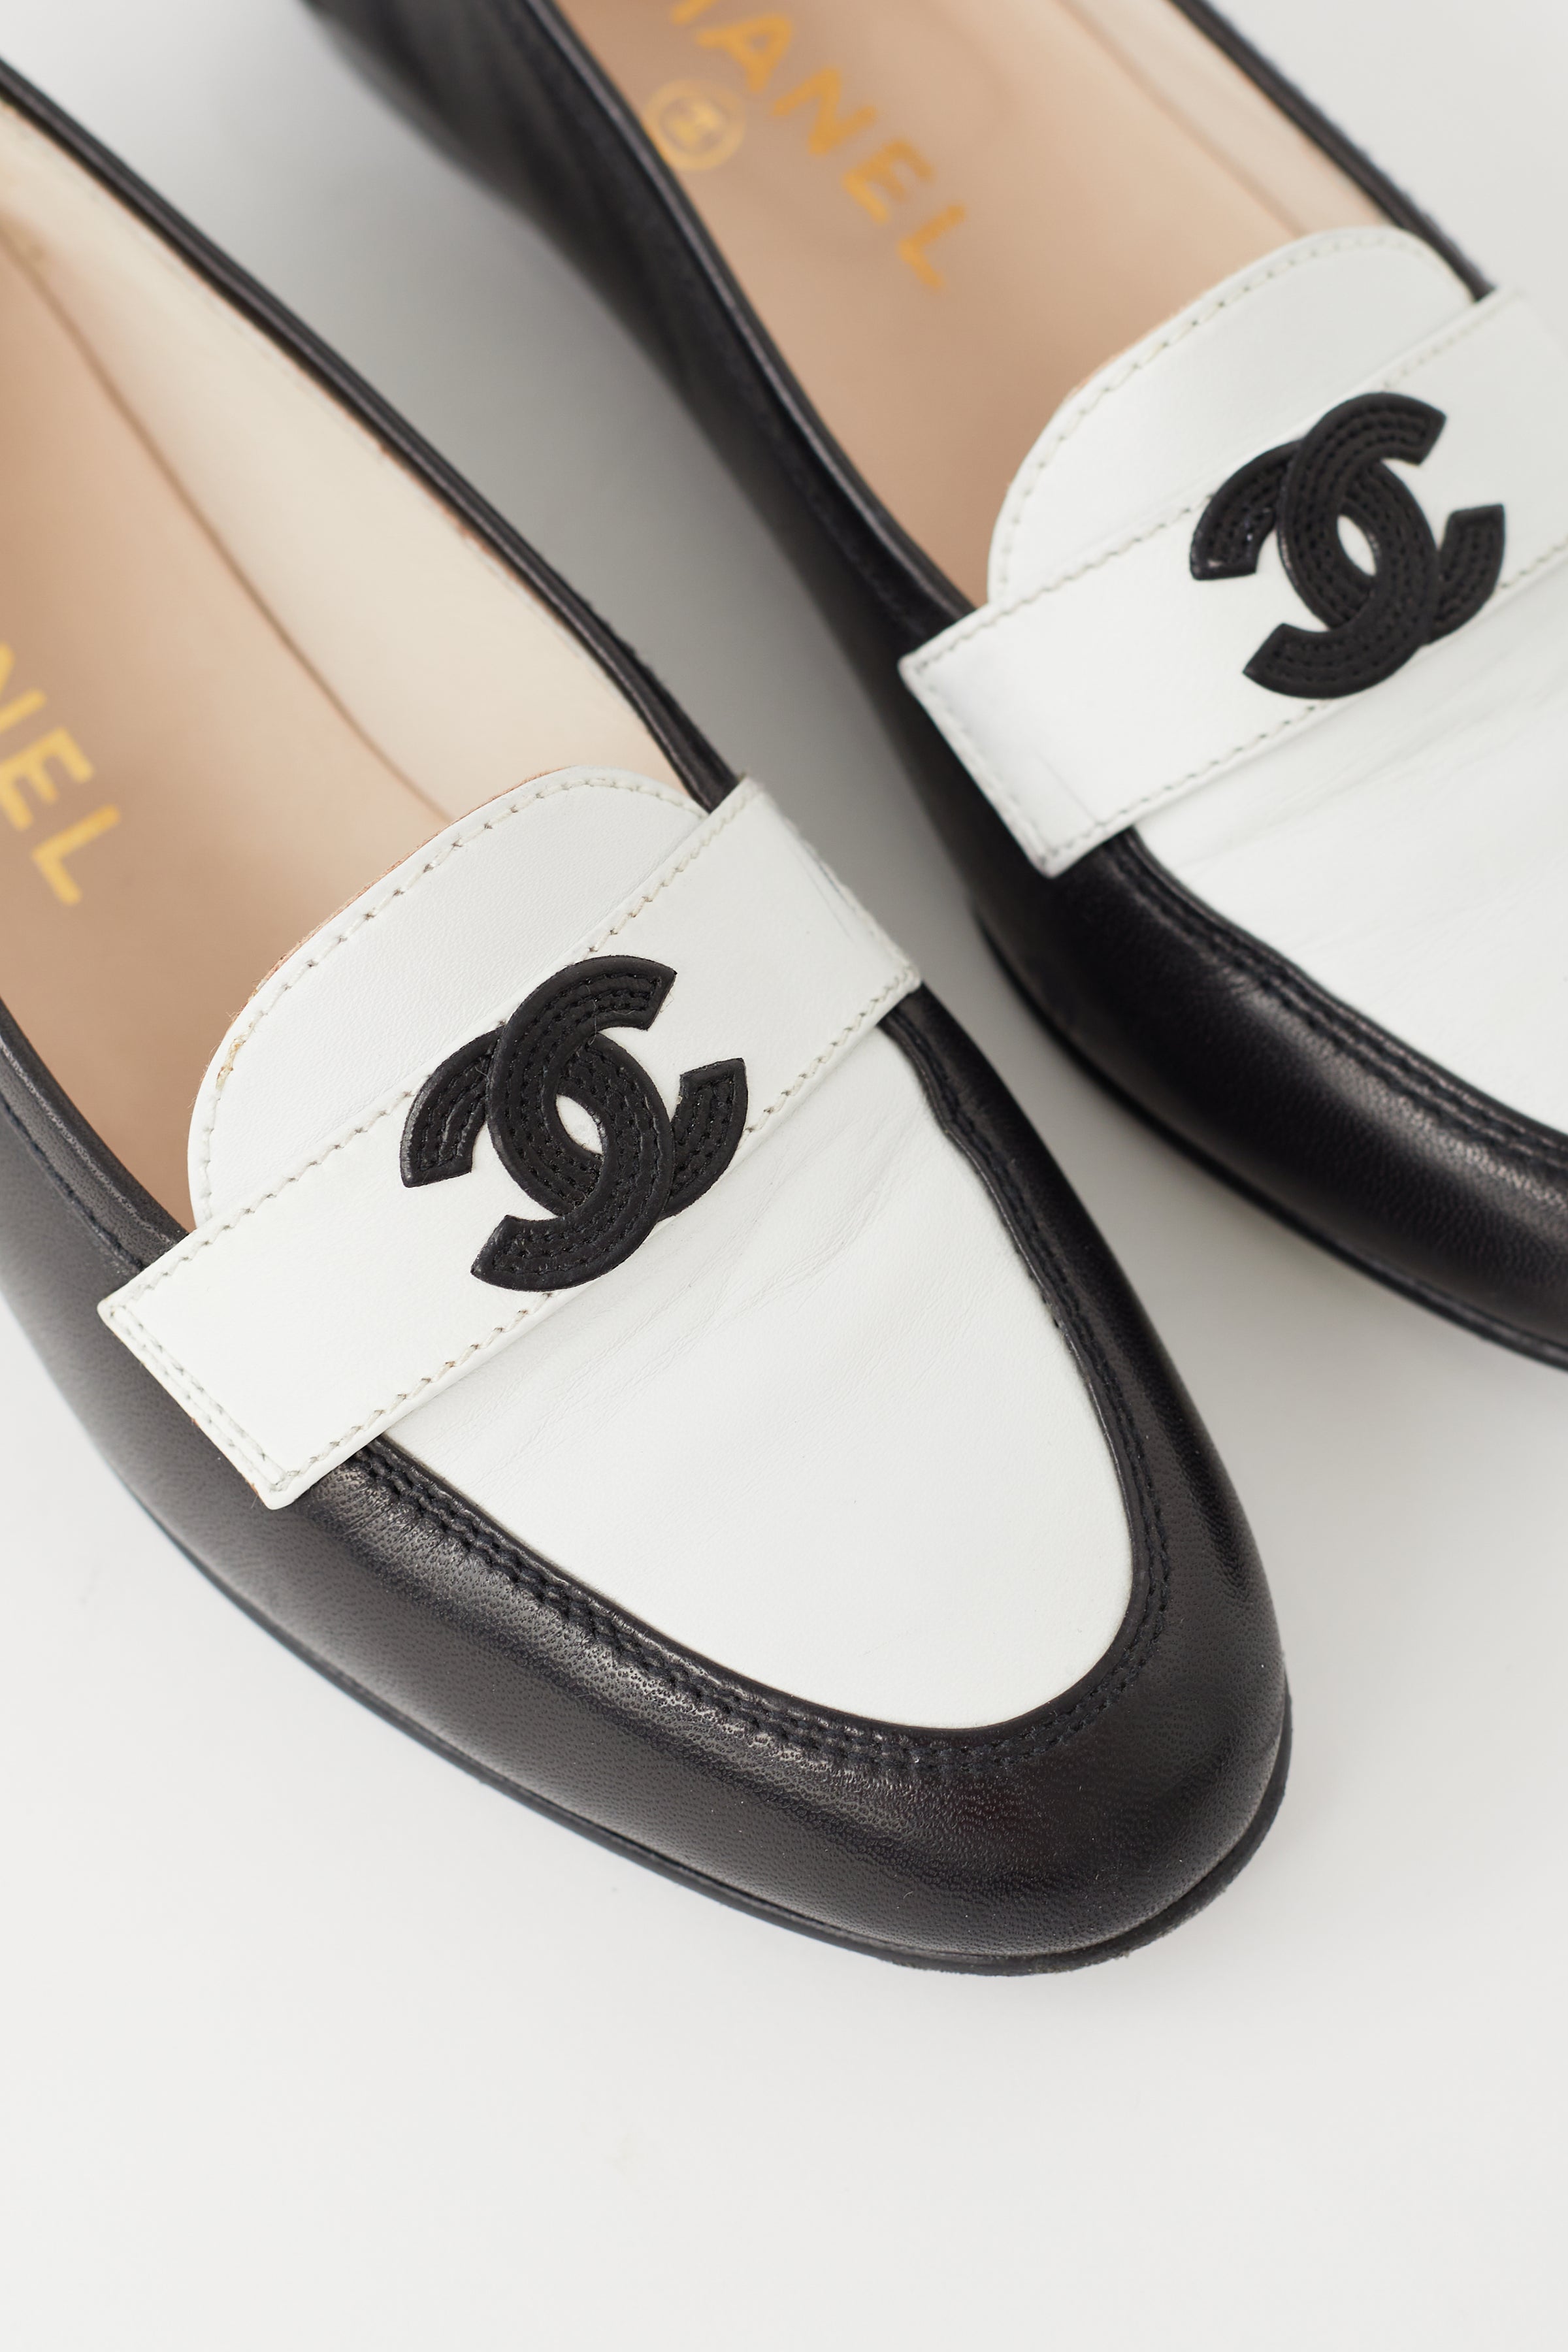 Chanel  Spring 1994 Black  White Leather Loafer  VSP Consignment